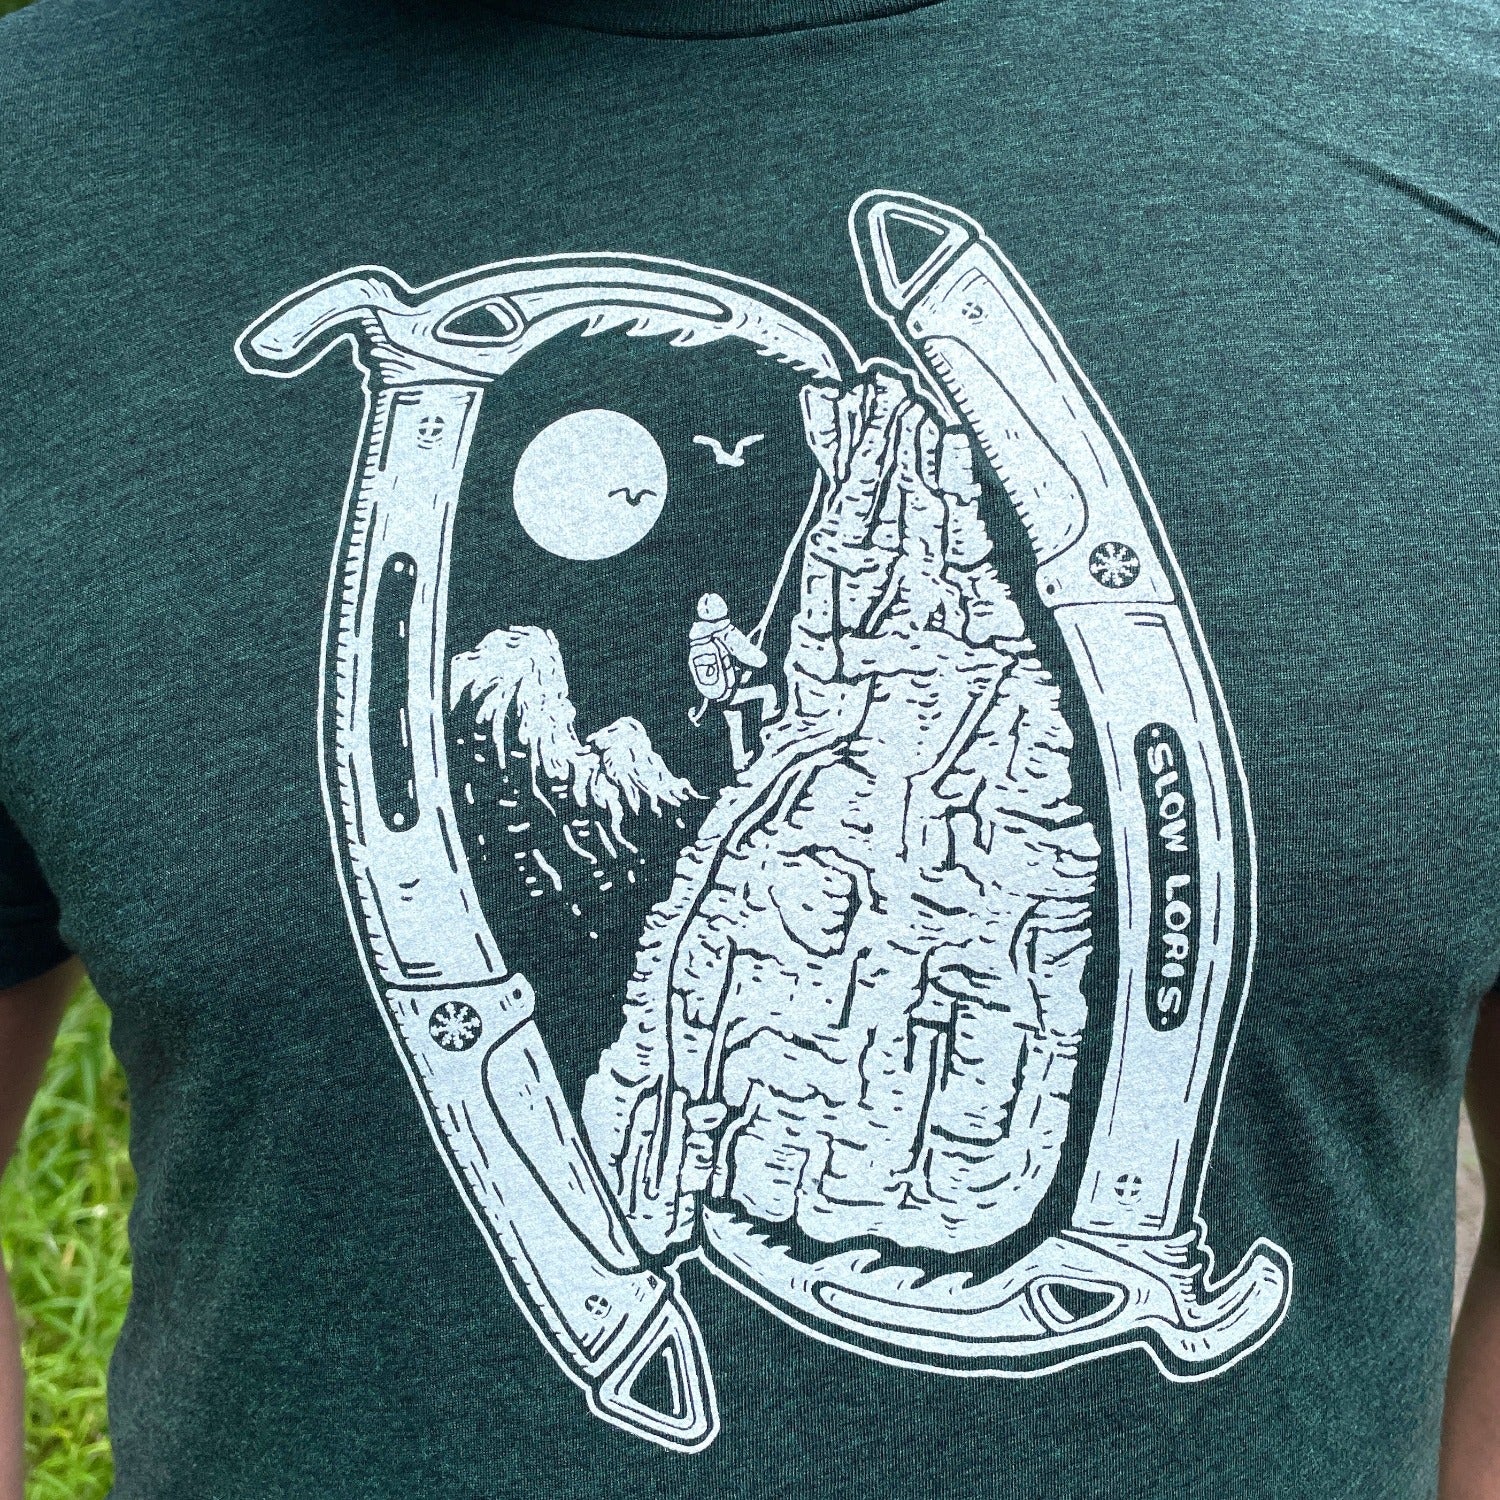 green t-shirt with ice Axes framing a climbing scene.